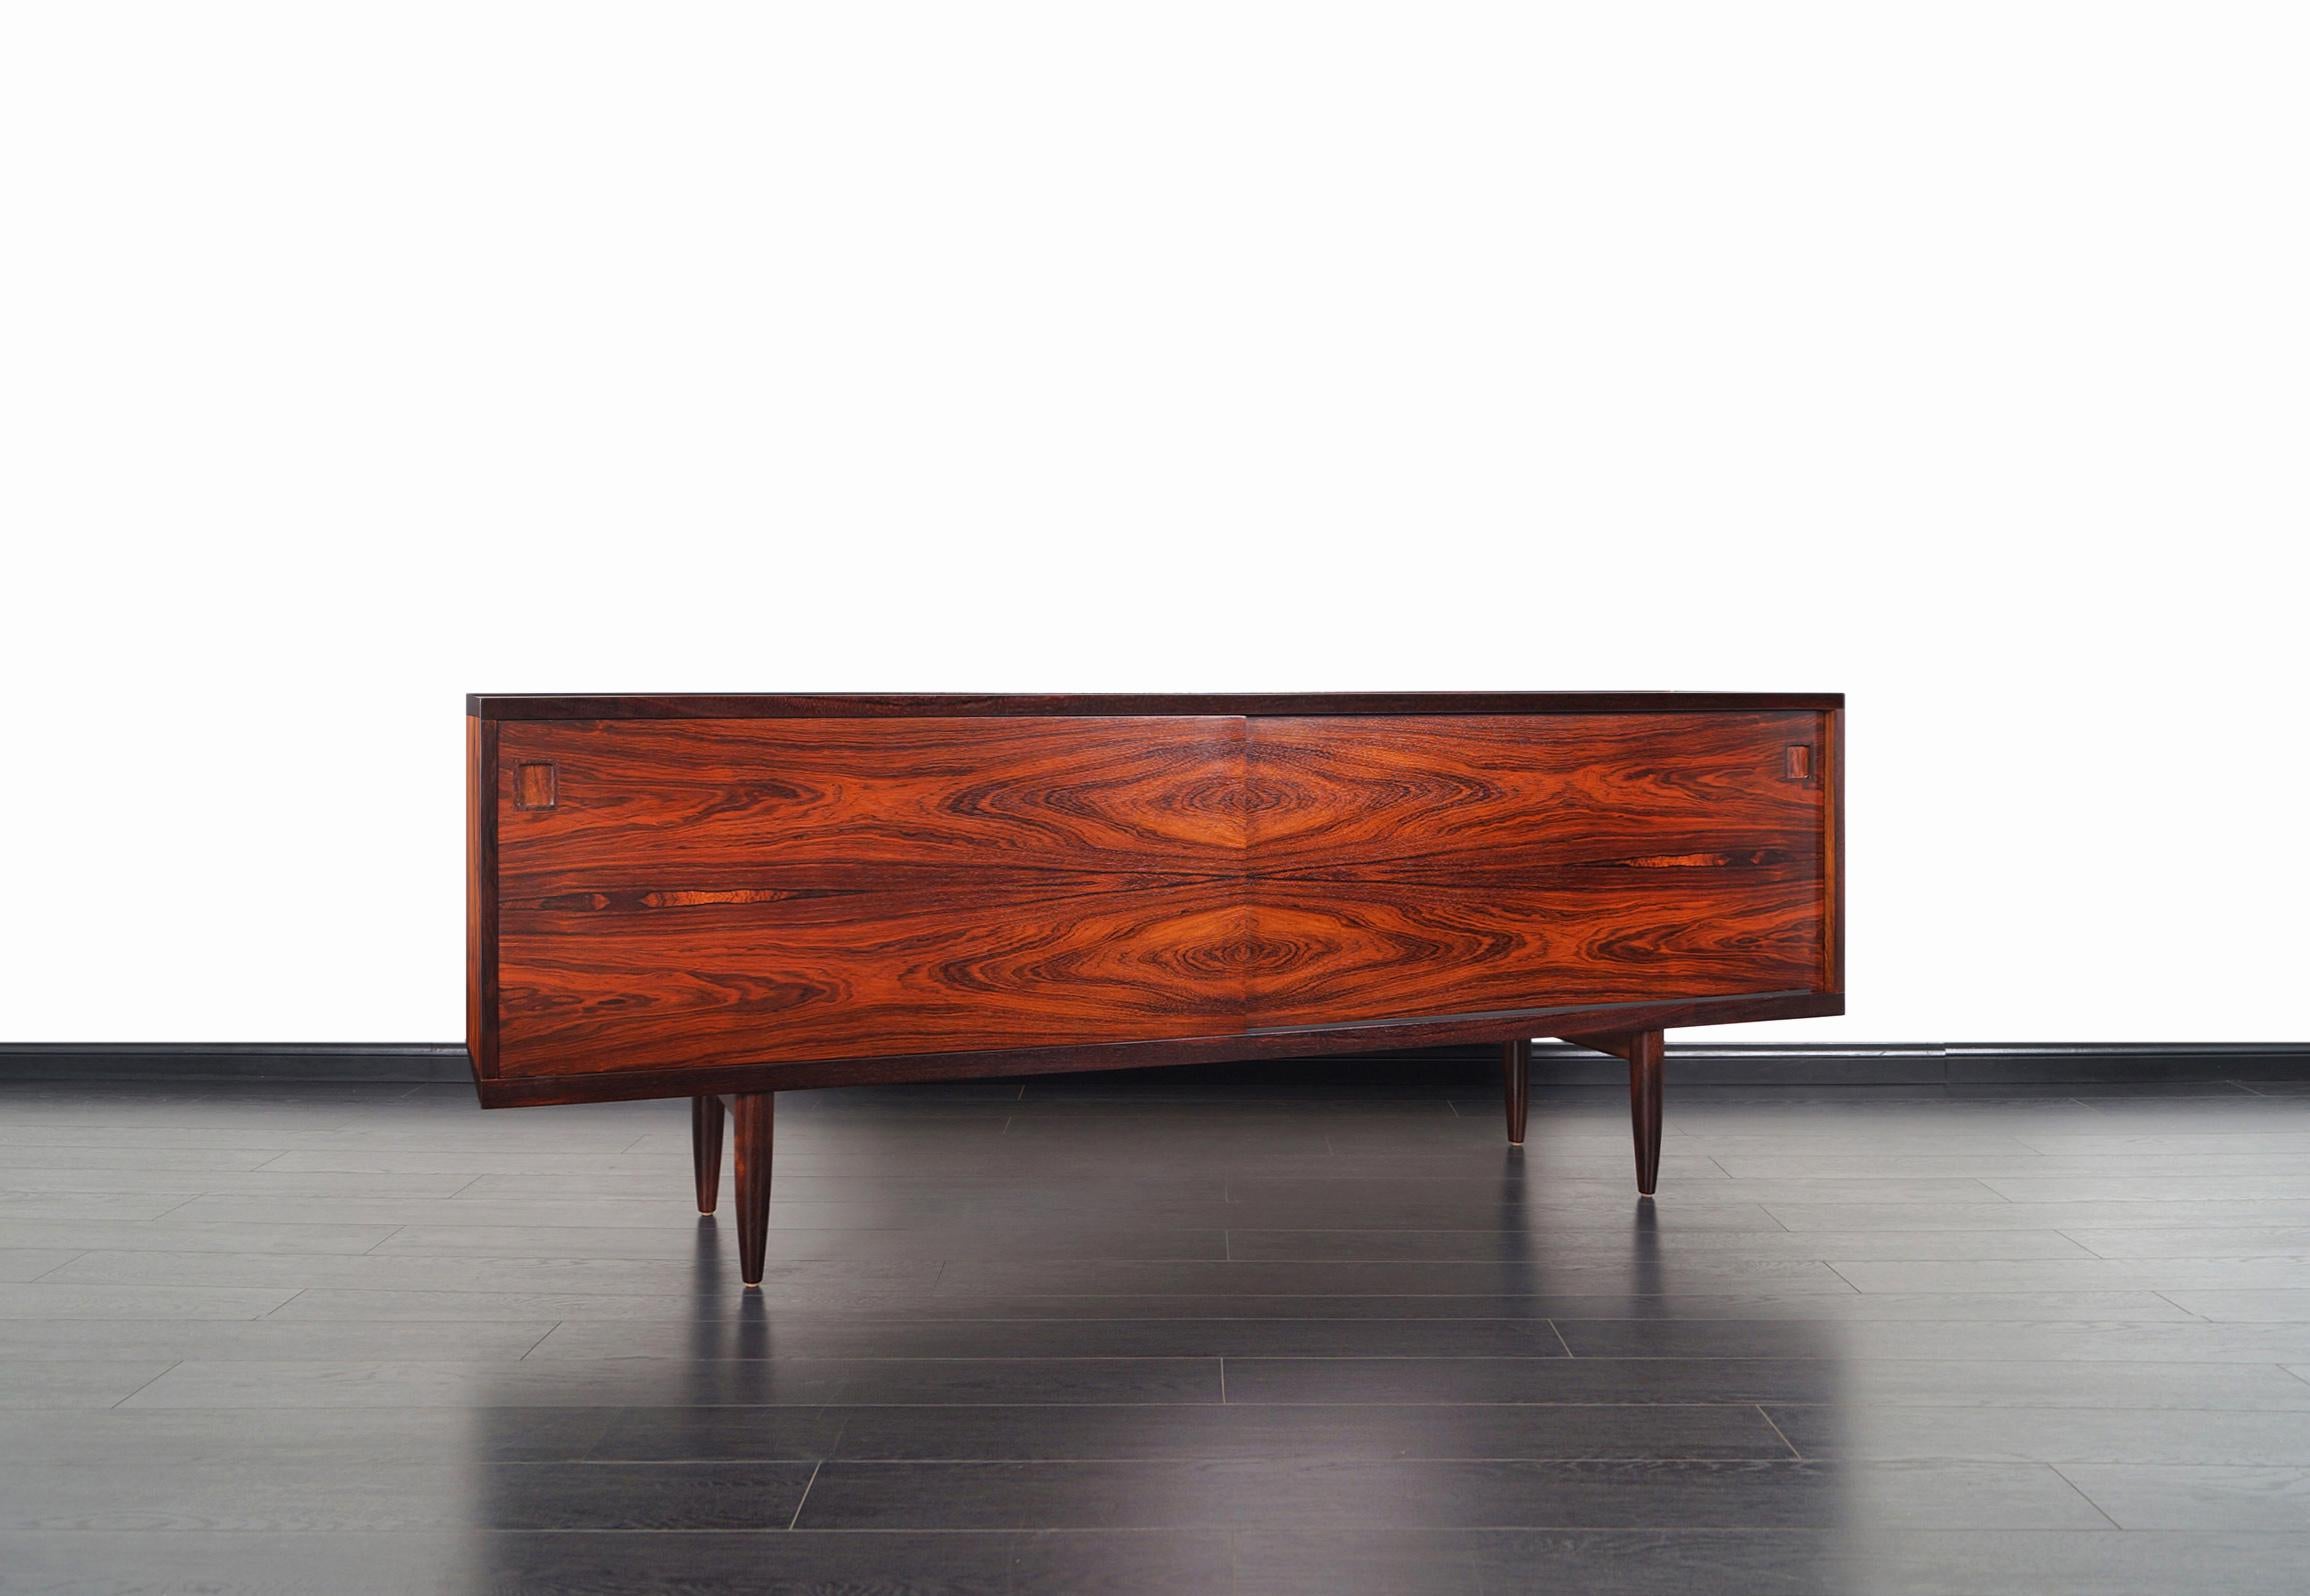 This rare Danish Brazilian rosewood credenza was designed by Niels O. Møller and produced by J.L. Møller Møbelfabrik, model # 20. Sitting on solid rosewood tapered legs, the casing features two sliding door panels with exotic Brazilian rosewood